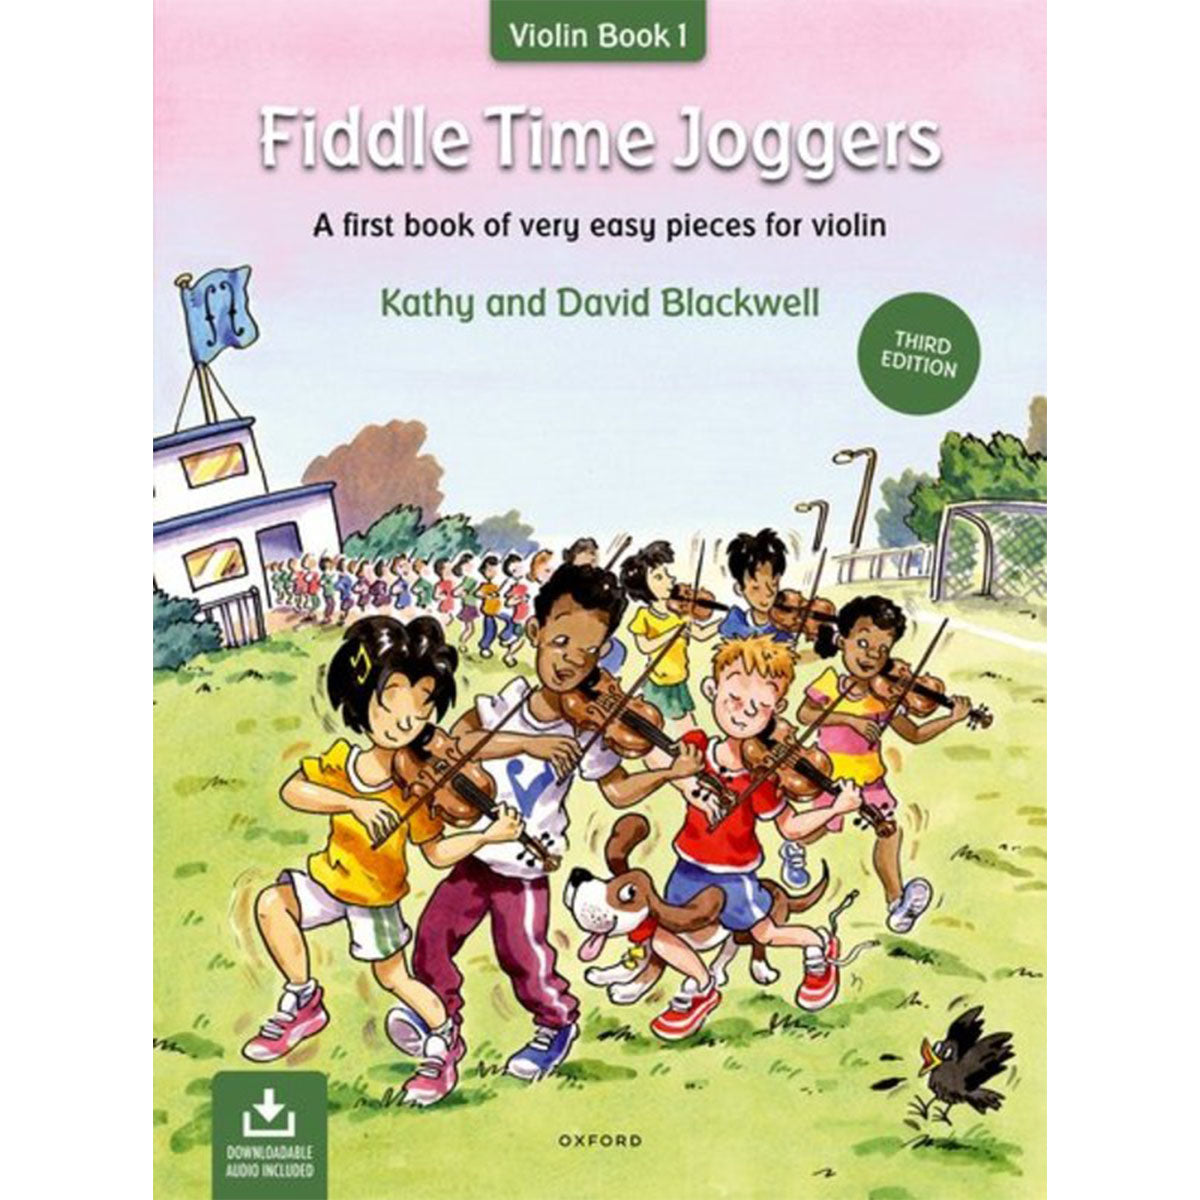 Fiddle Time Joggers Violin Book 1 (3rd Edition)